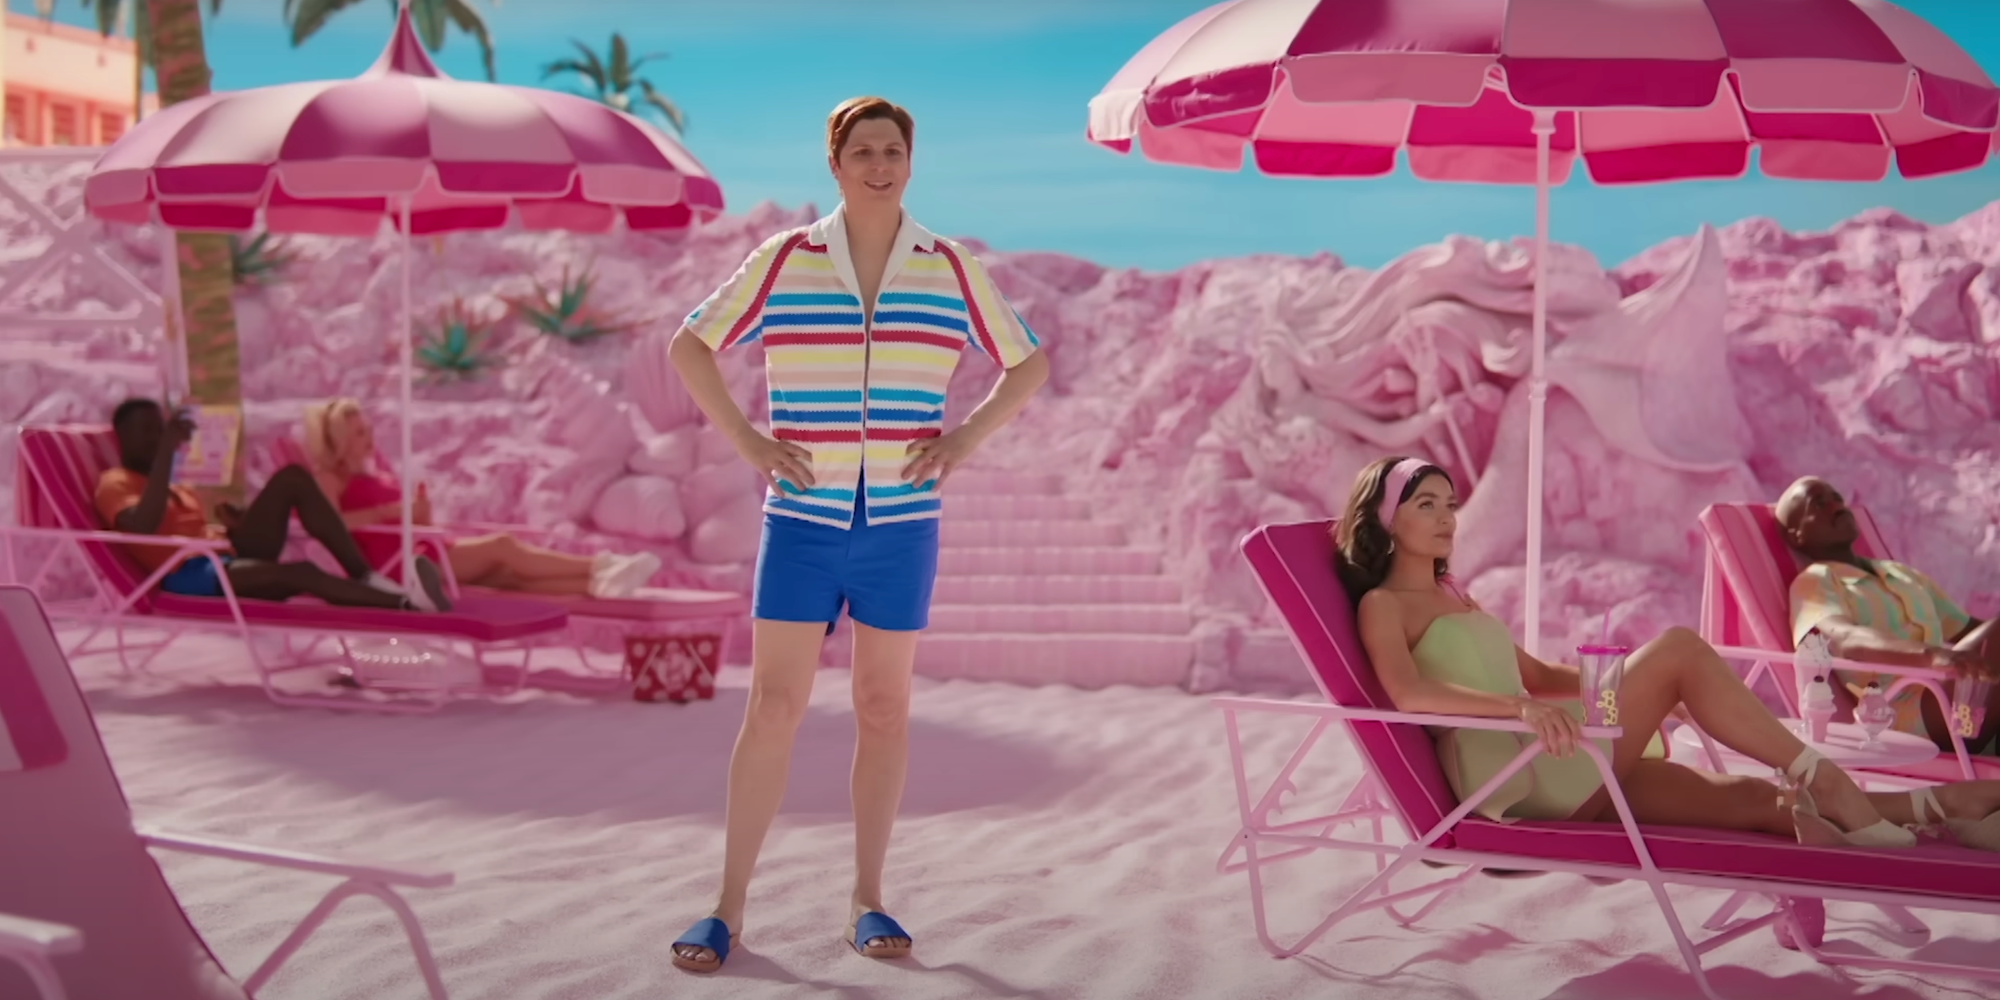 Michael Cera as Allan standing on the beach in Barbie